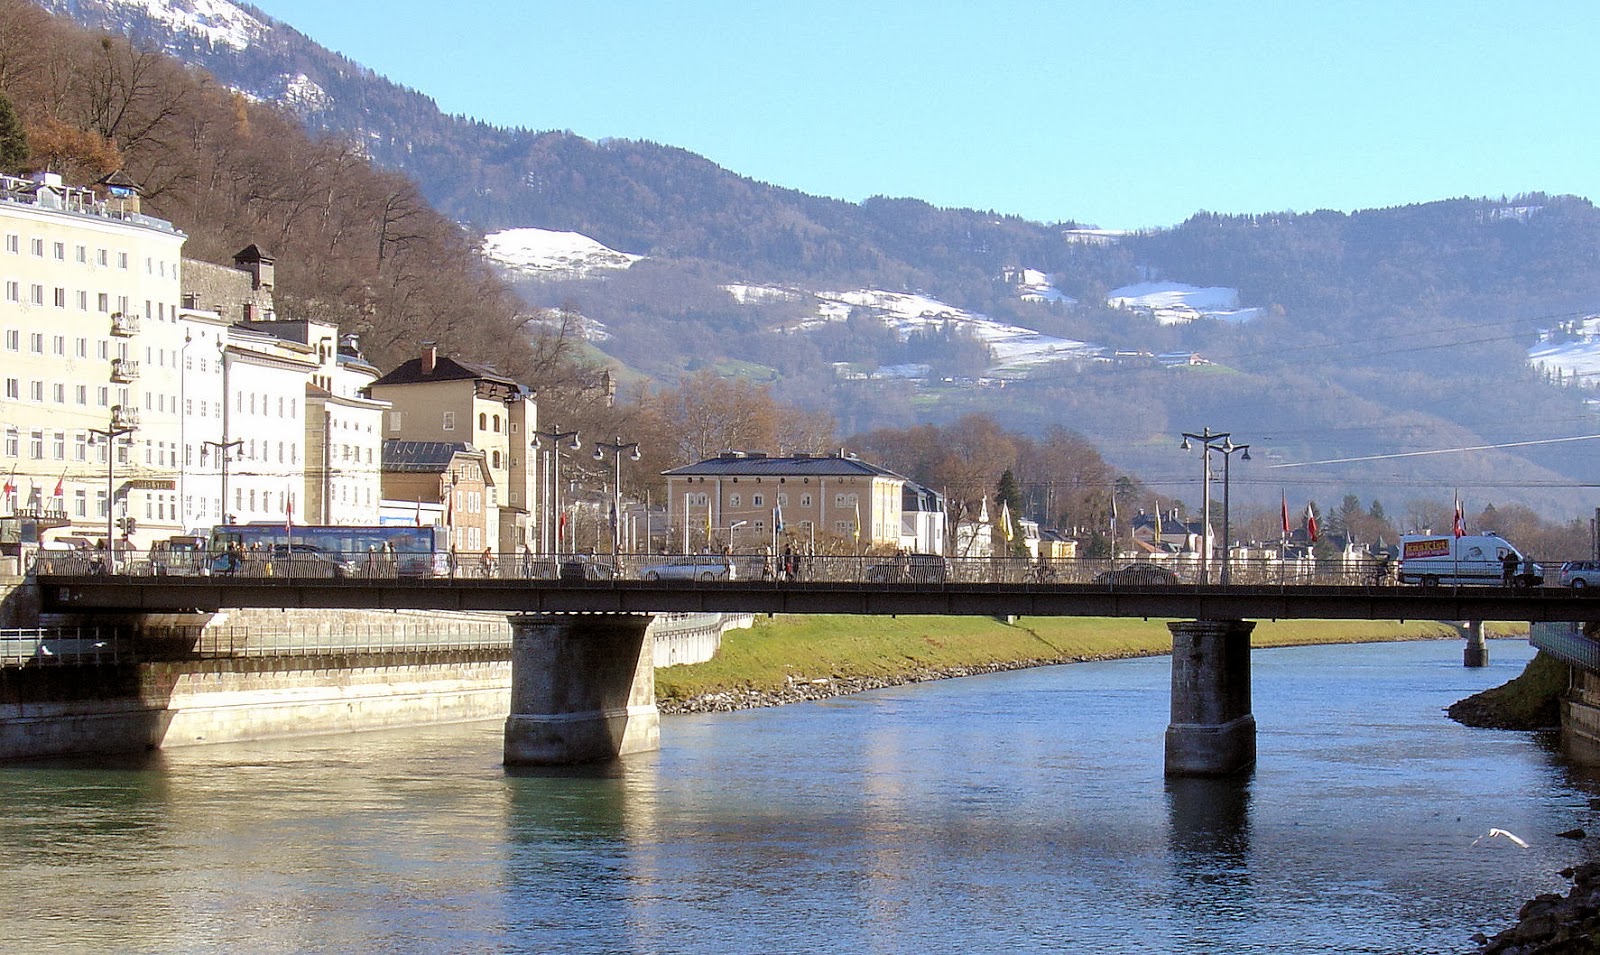 The 'Staatsbrücke' or Public Bridge to our left as we crossed the Salzach River is the 10th bridge to stand at this location and was completed by forced Nazi slave labor from Eastern Europe beginning in from 1939 through the WWII.